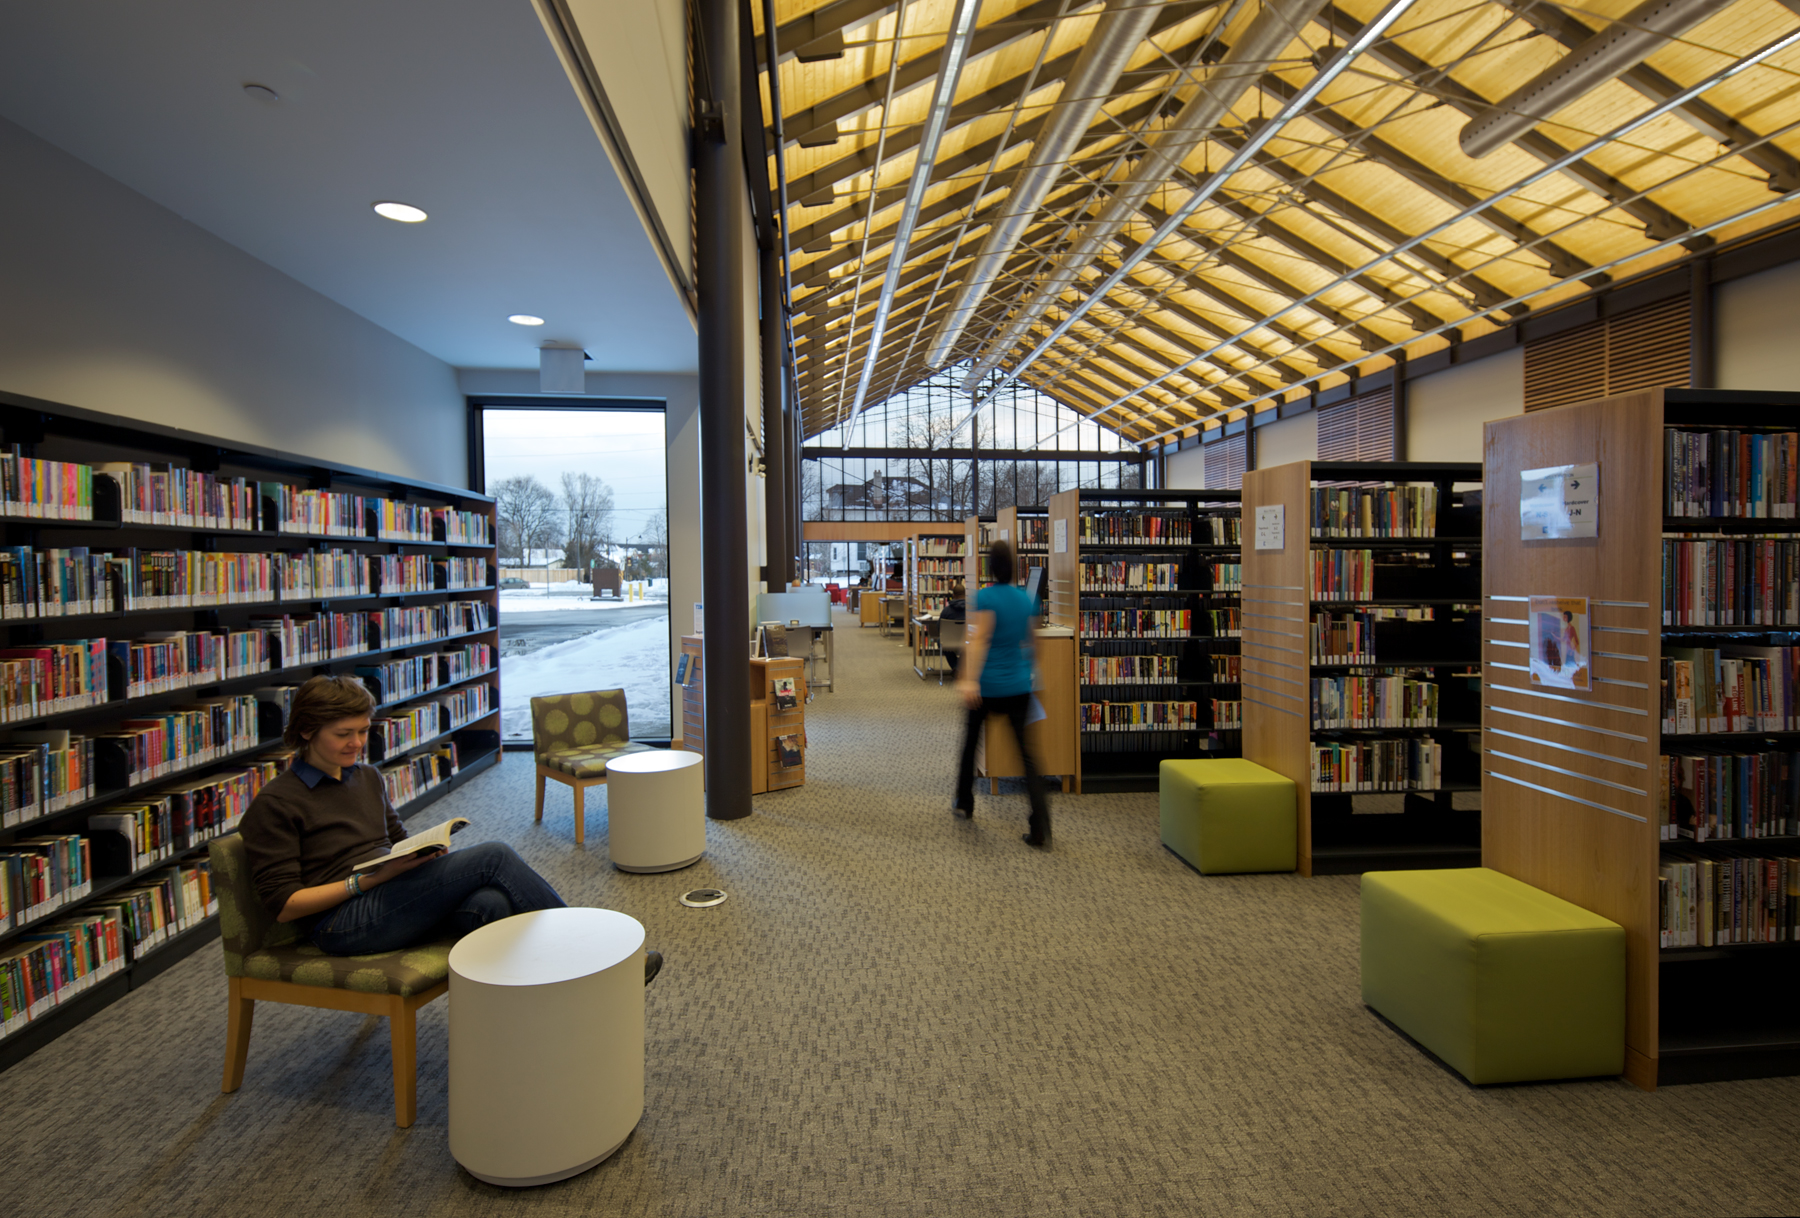 A person reading a book next to library stacks under an uplit wood and steel cathedral ceiling, resembling the inside of a barn.